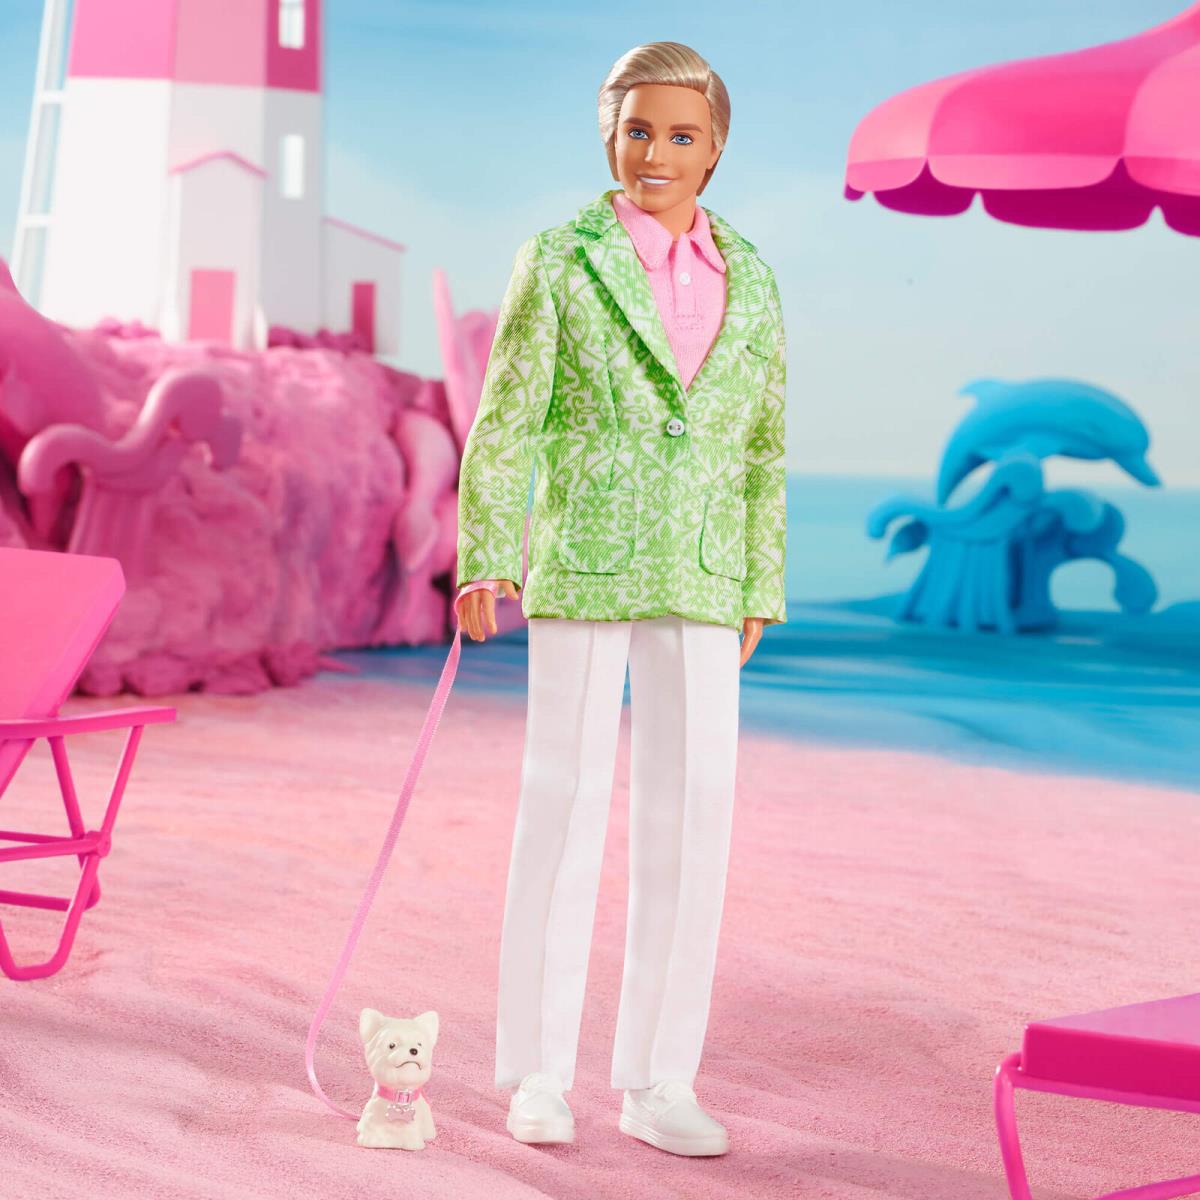 Barbie The Movie Sugar s Daddy Ken Doll in Pastel Suit with Dog